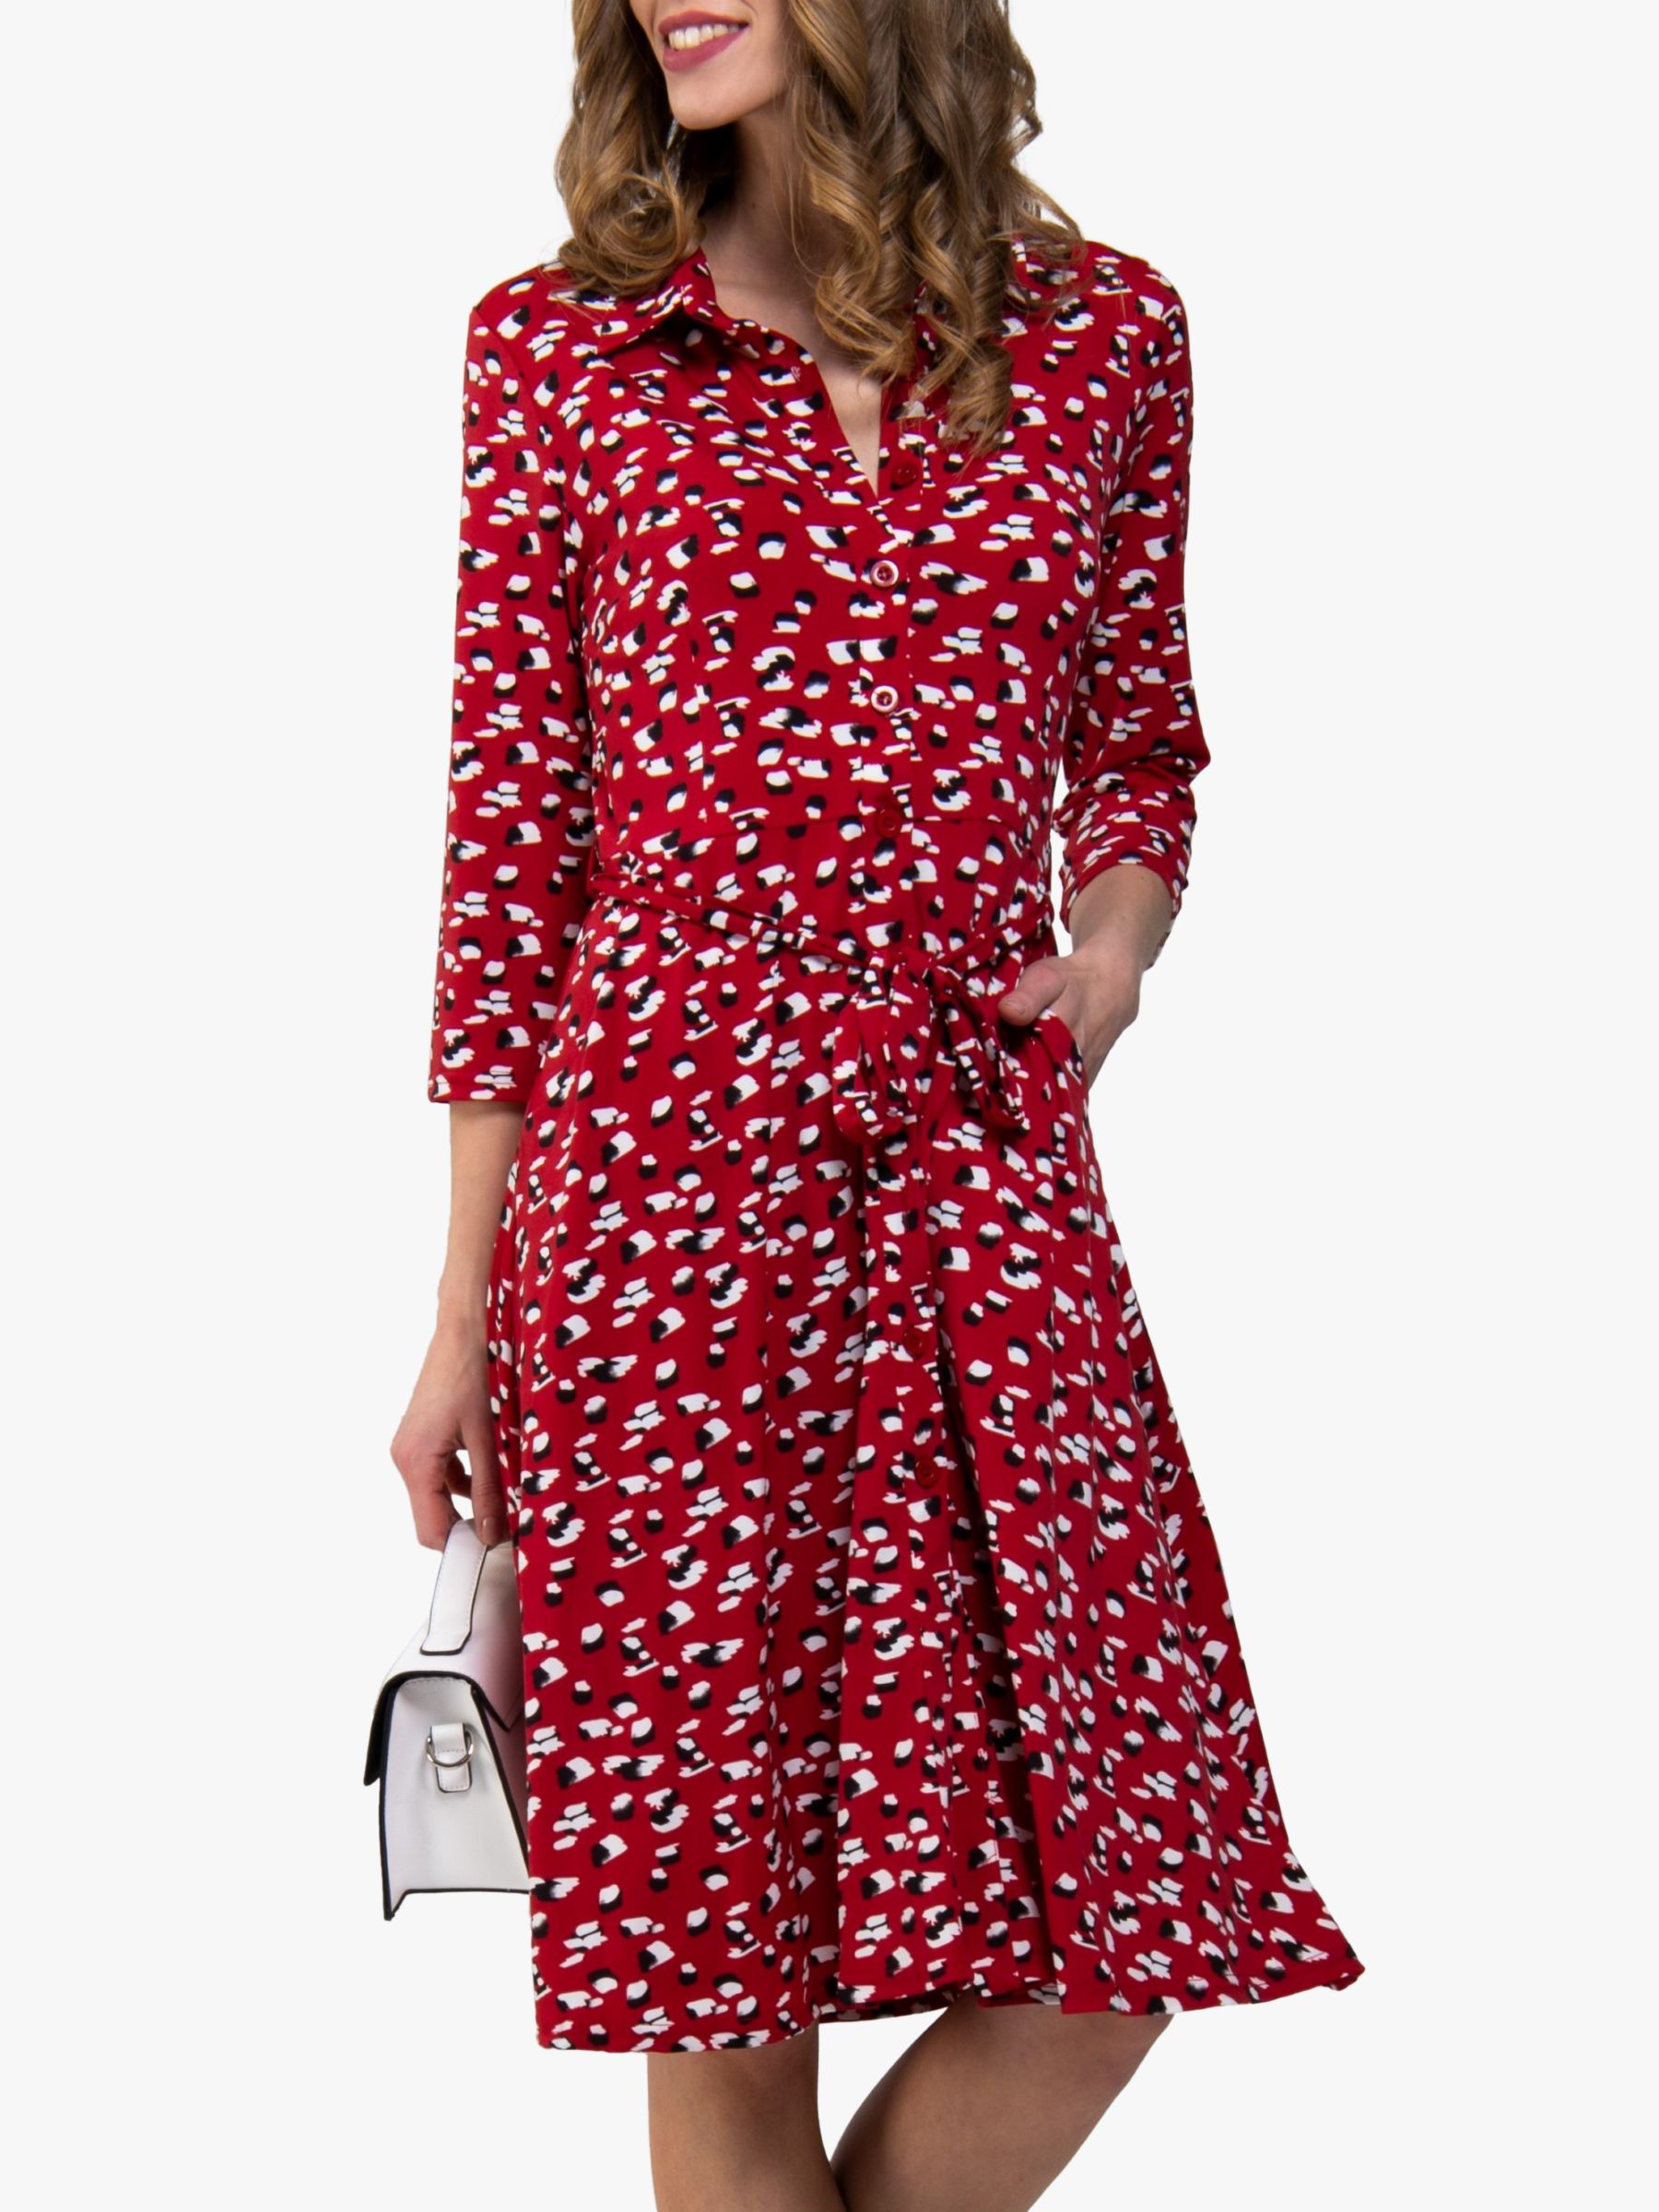 Jolie Moi Animal Print Fit and Flare Shirt Dress, Red/Multi at John Lewis & Partners